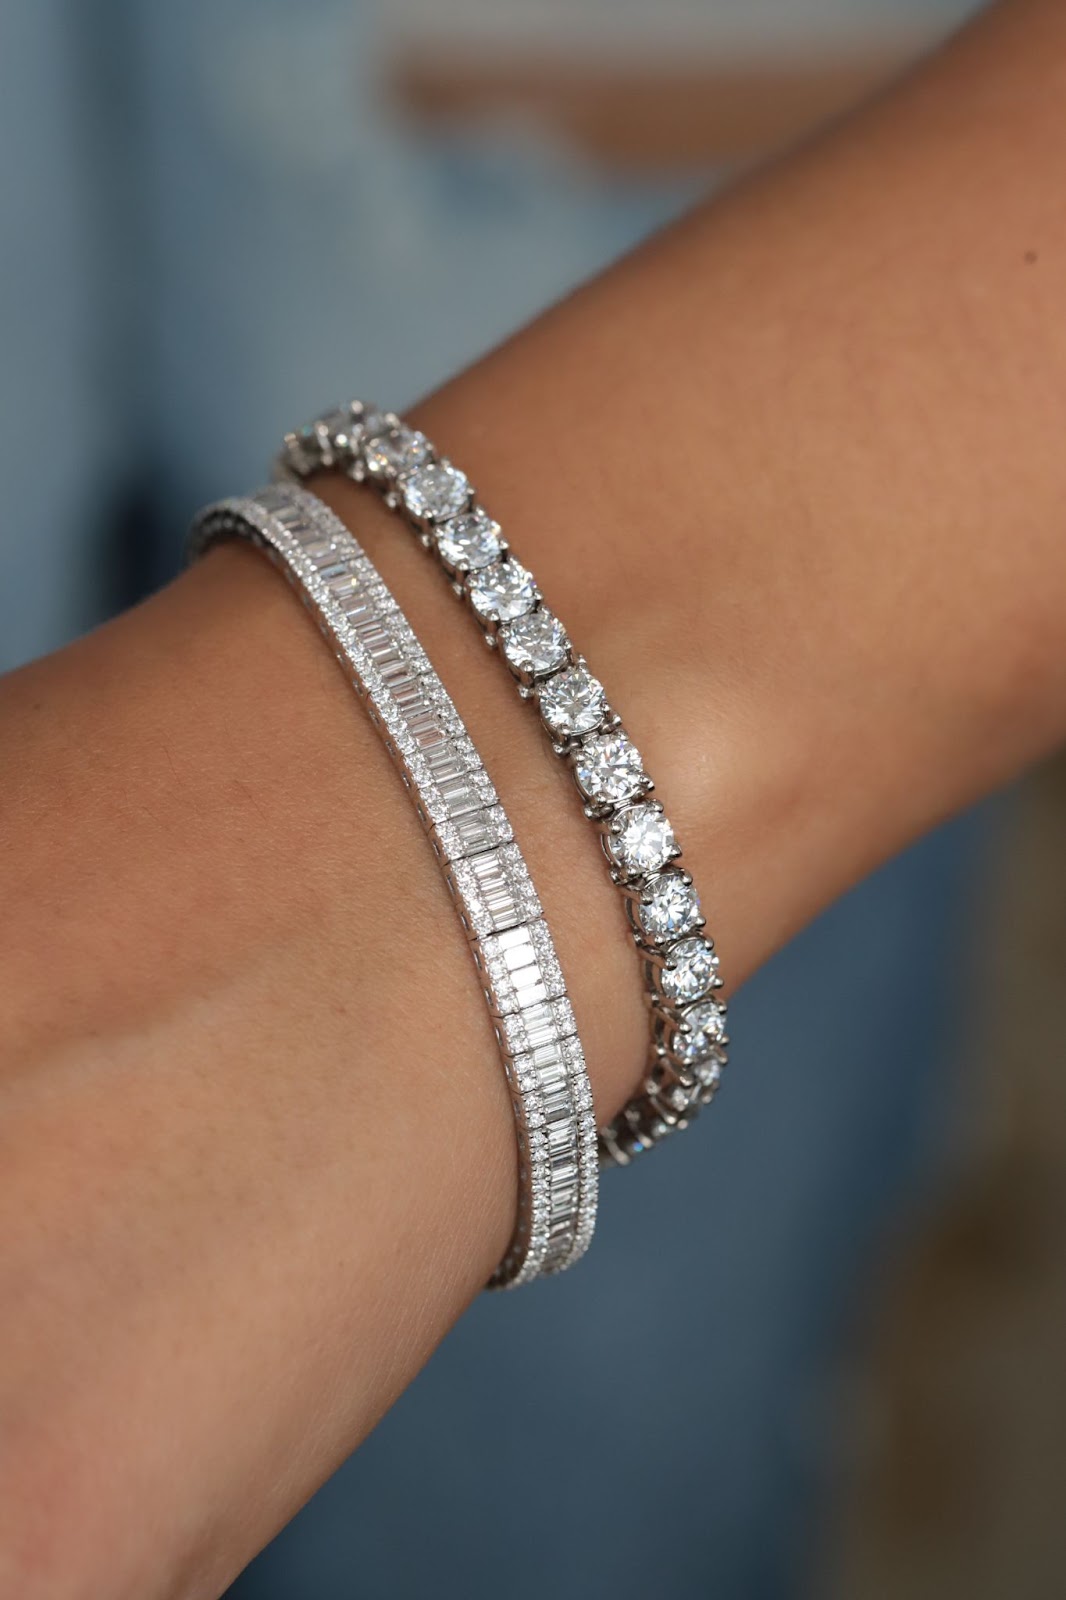 Diamond Tennis Bracelet Stack of Two. From Diamond and Gold Warehouse in Dallas, Texas